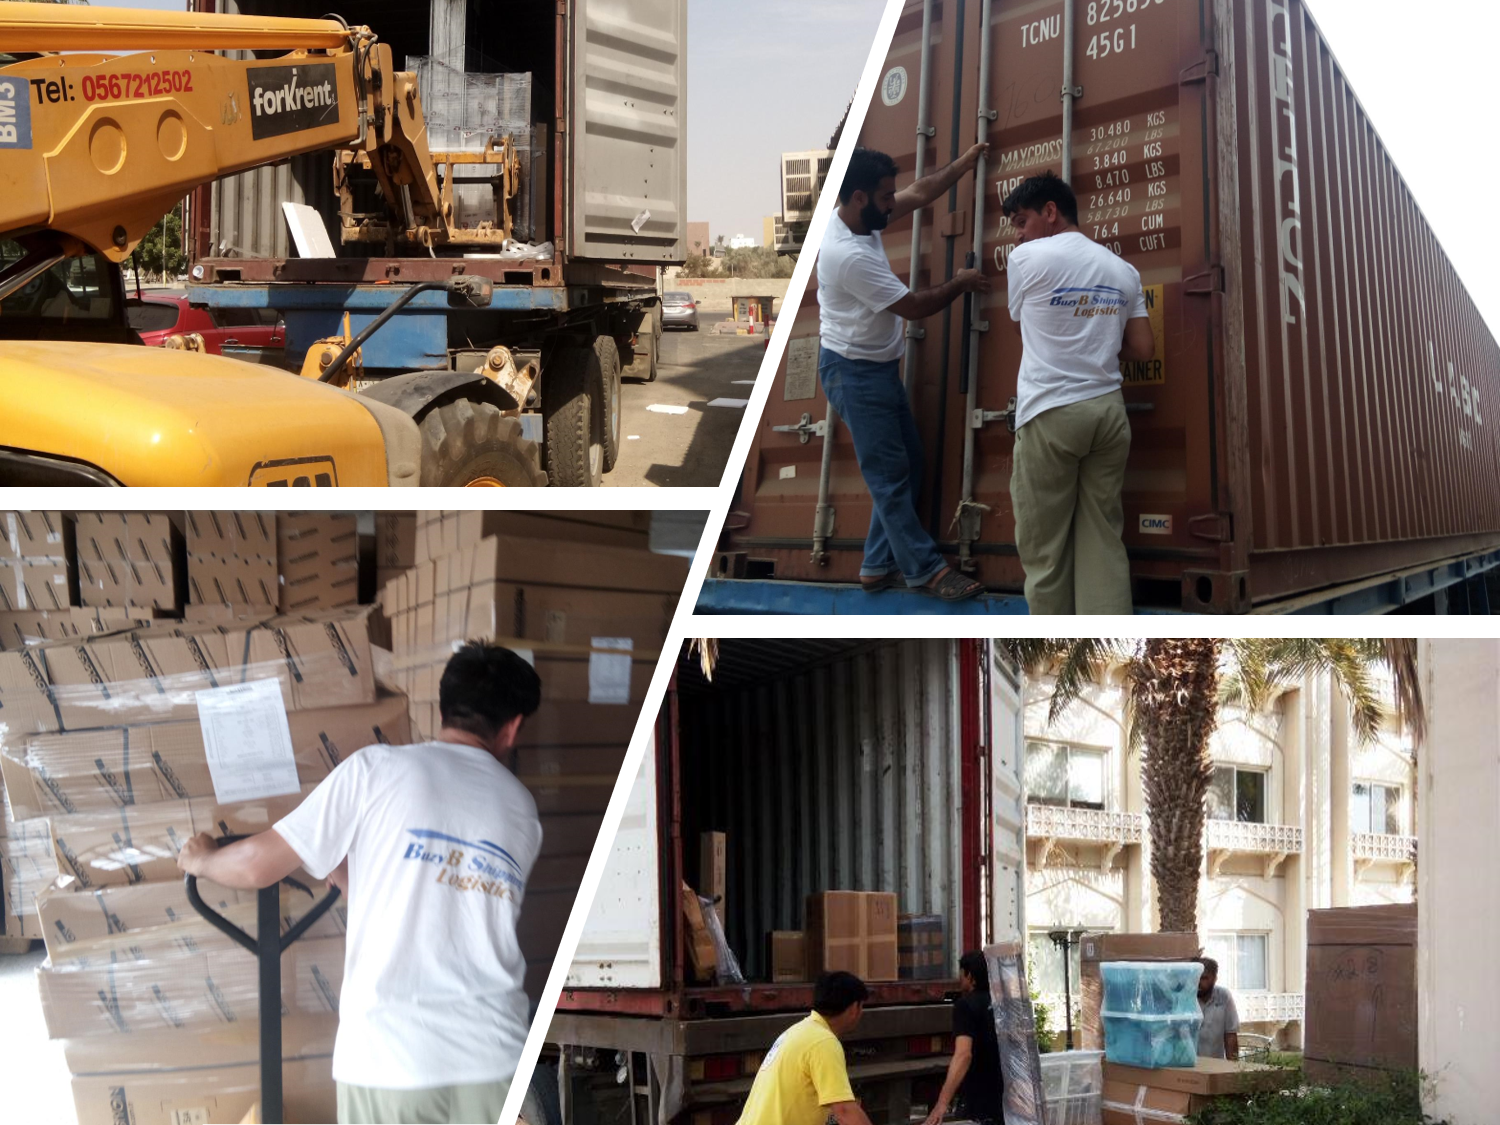 best sea cargo in Jeddah Saudi Arabia.
All shipping cargo services from Jeddah to the USA, Canada, and Europe from loading cargo to storage and unloading the sea or air freight are carried out under full supervision thus ensuring that your freight reaches its destination without damage. At Buzyb Shipping Logistics Jeddah, we recognize the fact that each of our customers will have a specific door-to-door requirement in the US, Canada, the UK, and Europe.